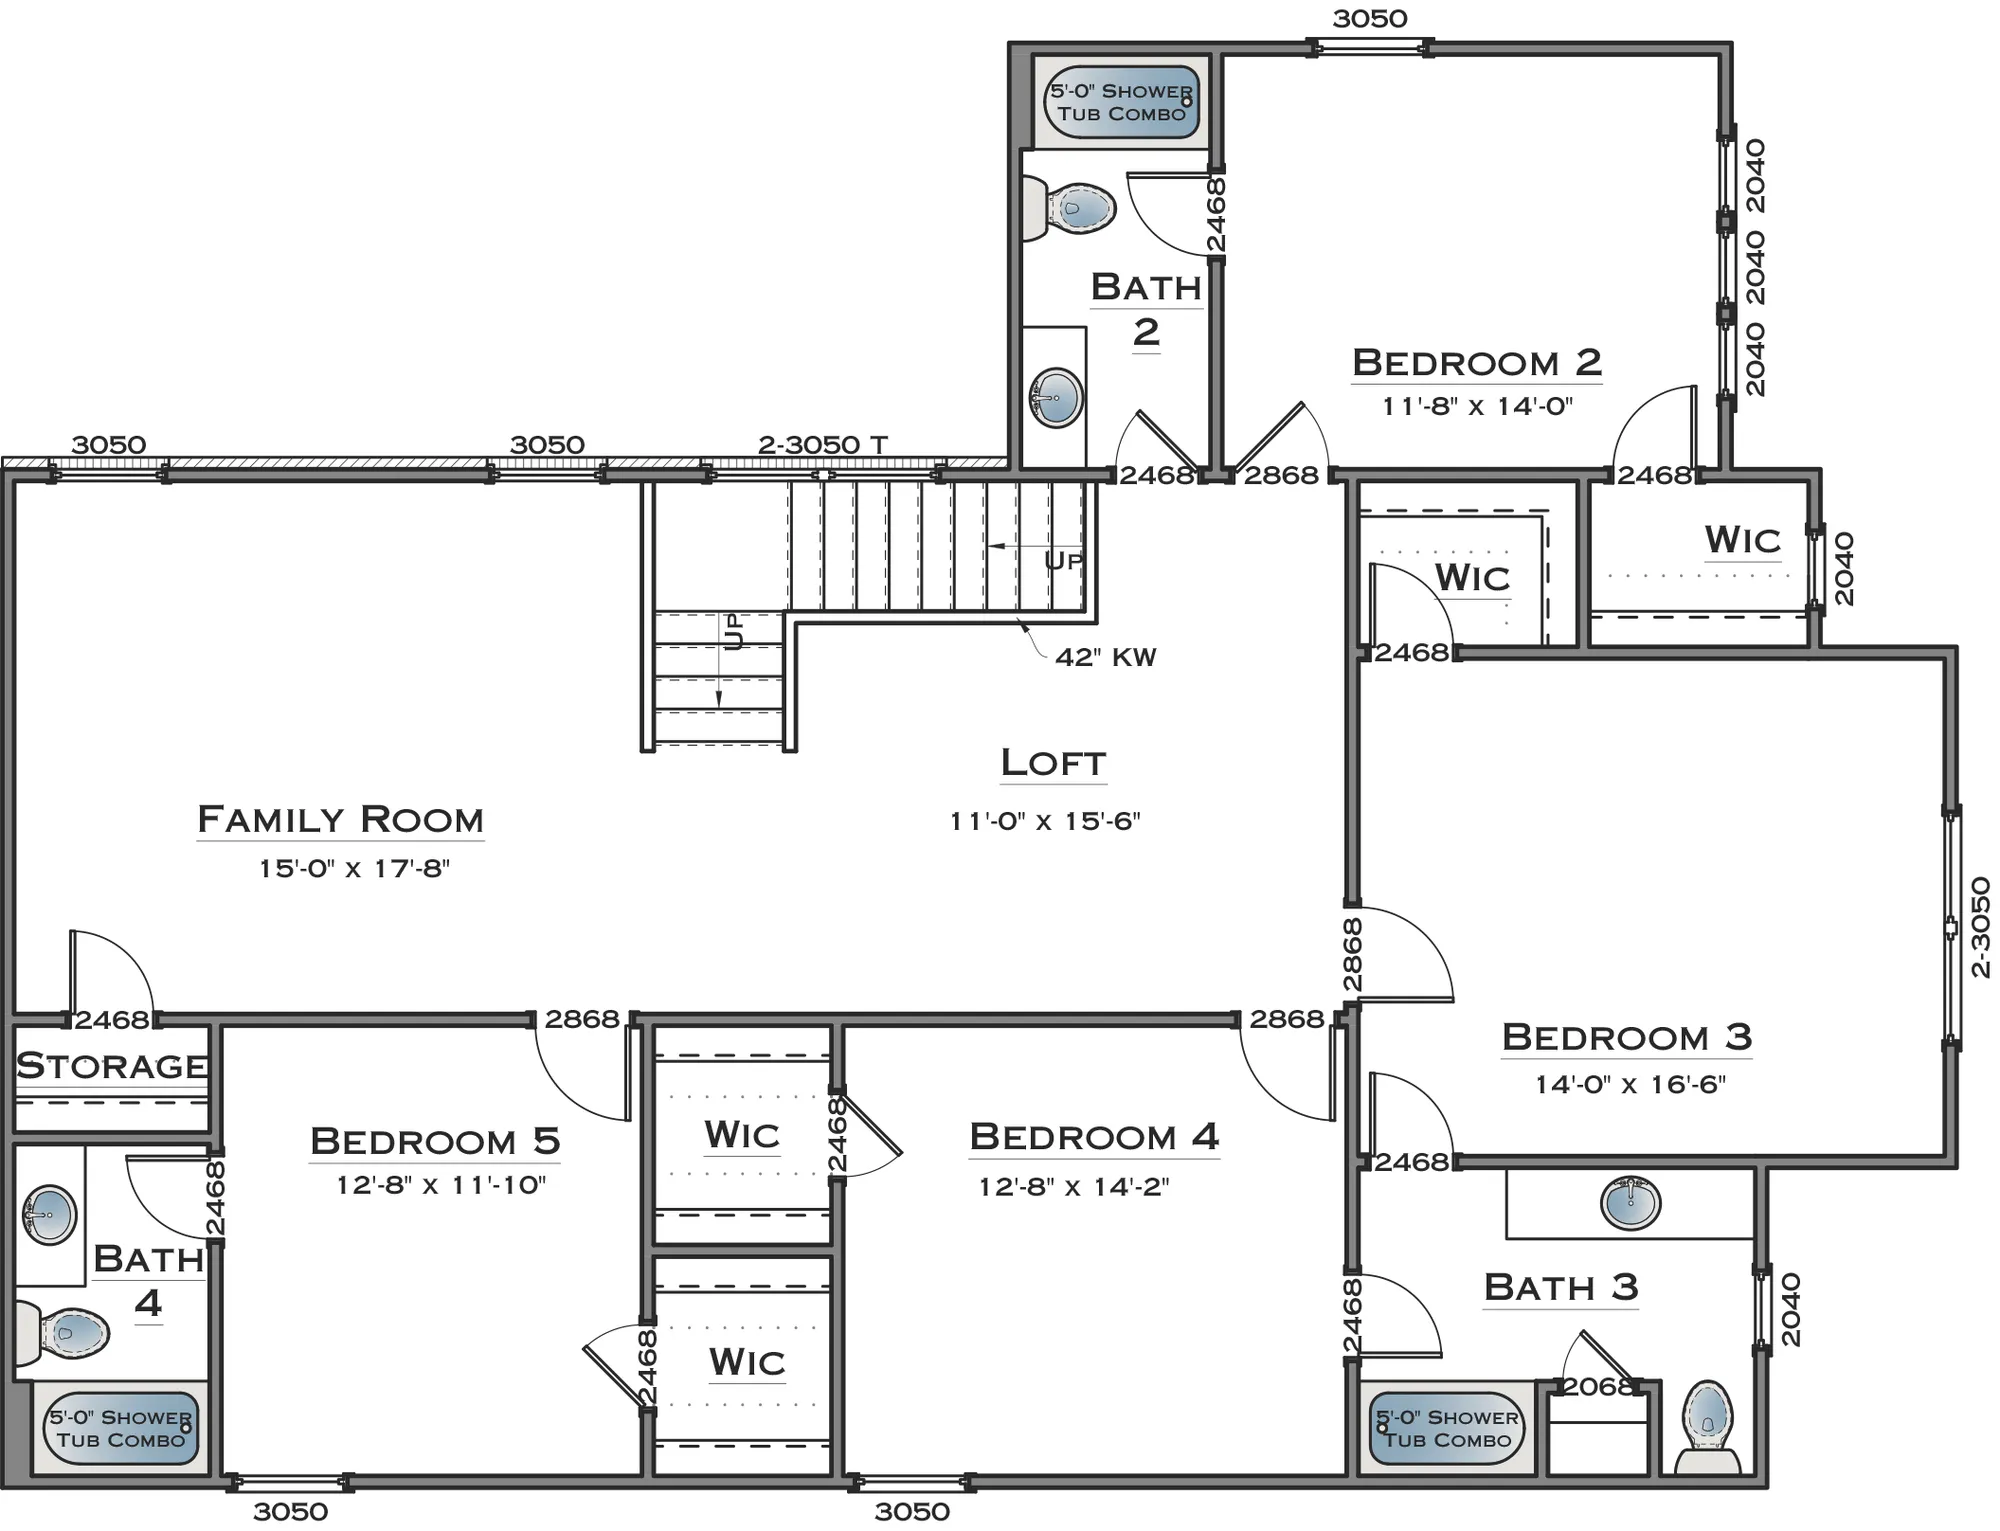 2nd Floor Family Room - Bed 5 - Bath 4 - undefined